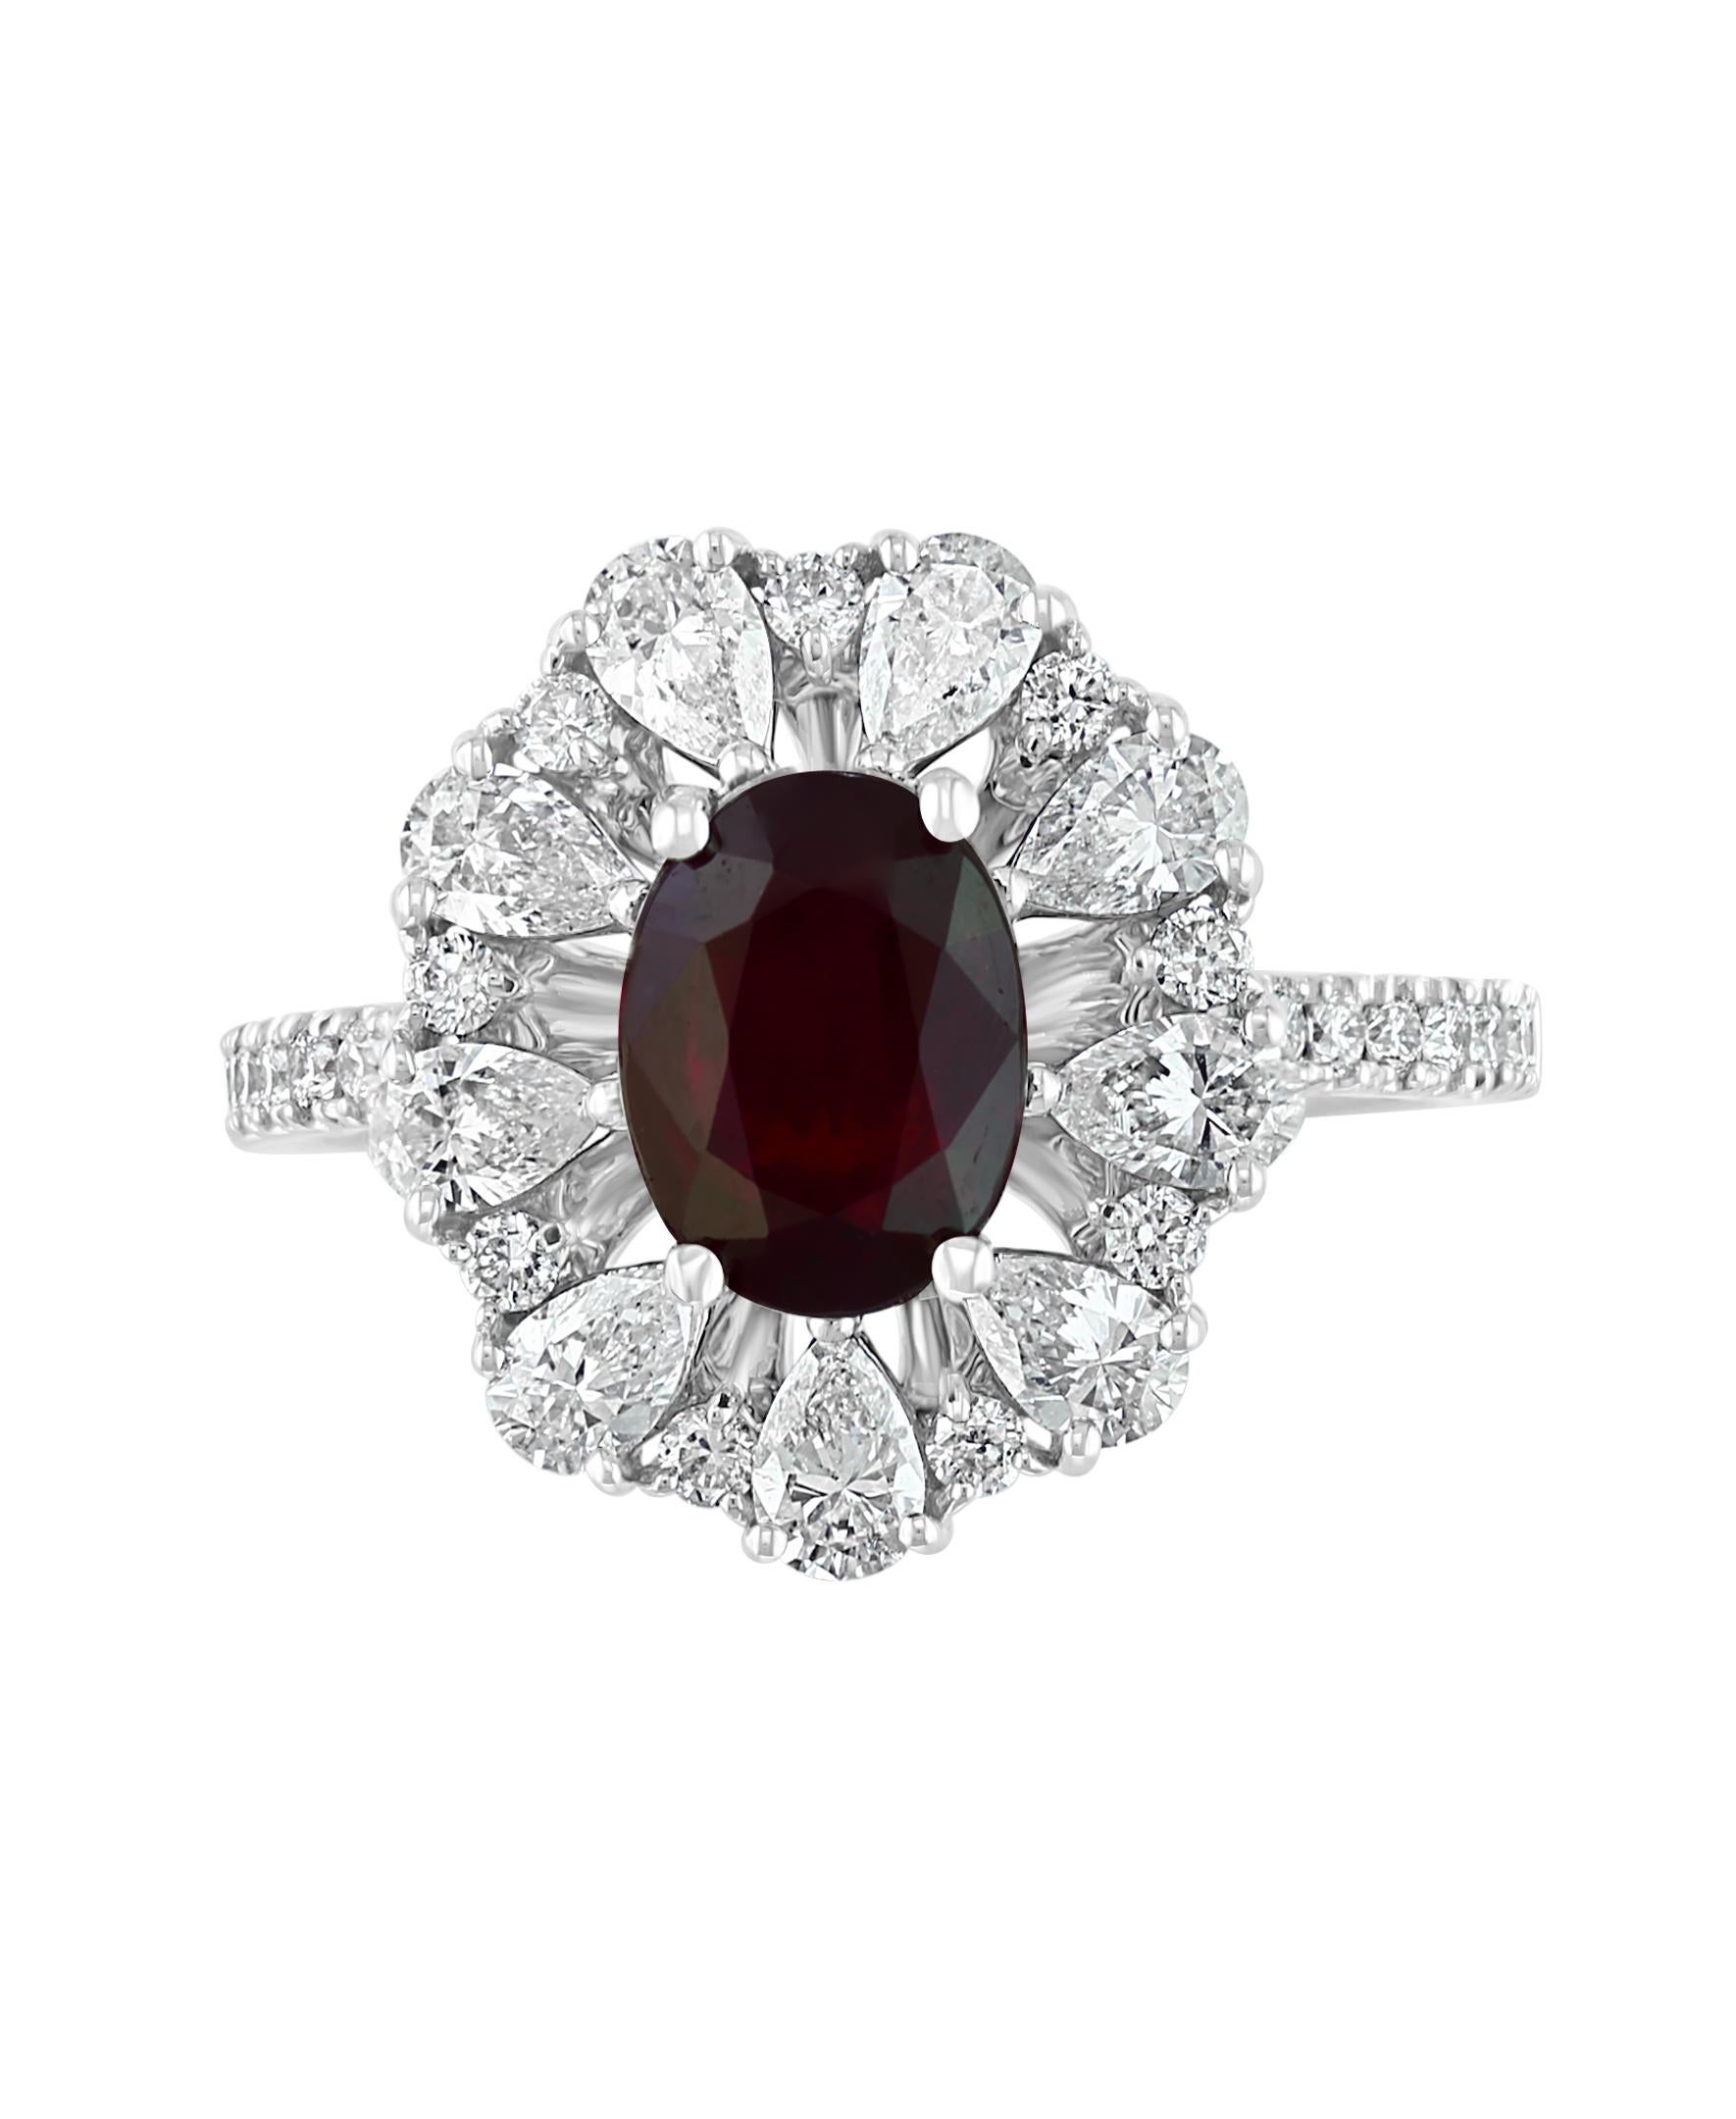 This Effy Hematian design ring is set in 18K White gold. The center stone Ruby is oval cut, and has a weight of 1.75 ct.
Surrounded by nine Pear shape Diamonds with a weight of 0.88 ct. and round cut diamonds with a weight of 0.29 ct. Together all